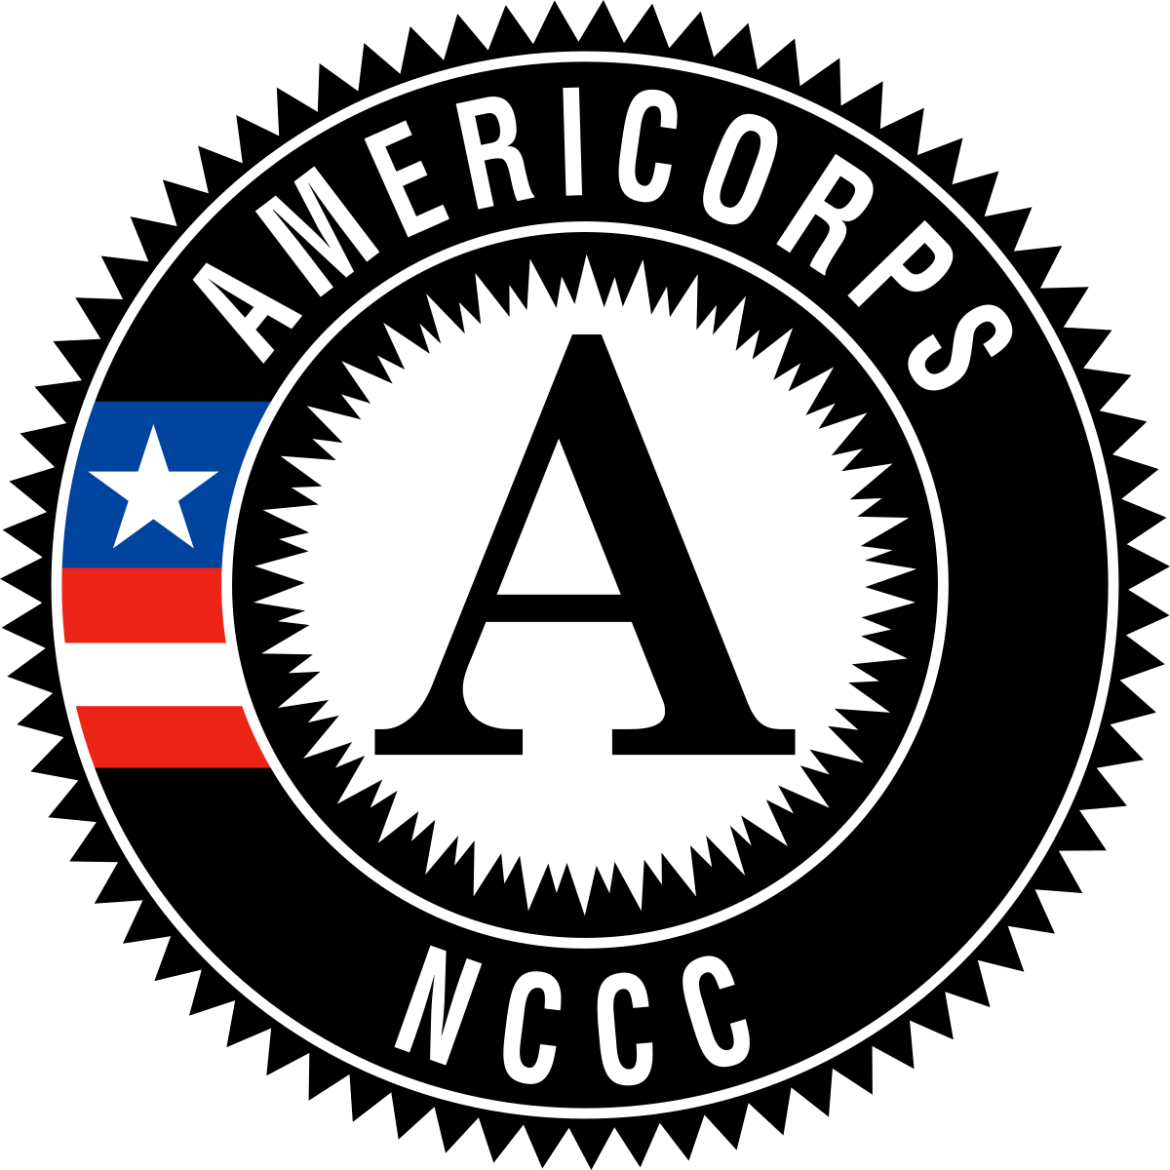 The letter A in black font is centered within a spiky black ring. The top of the ring says "AMERICORPS" in white font and "NCCC" in white font at the bottom of the ring. On the left of the ring, is a part of the American flag, with one white star over a blue background, two red stripes and one white stripe between.